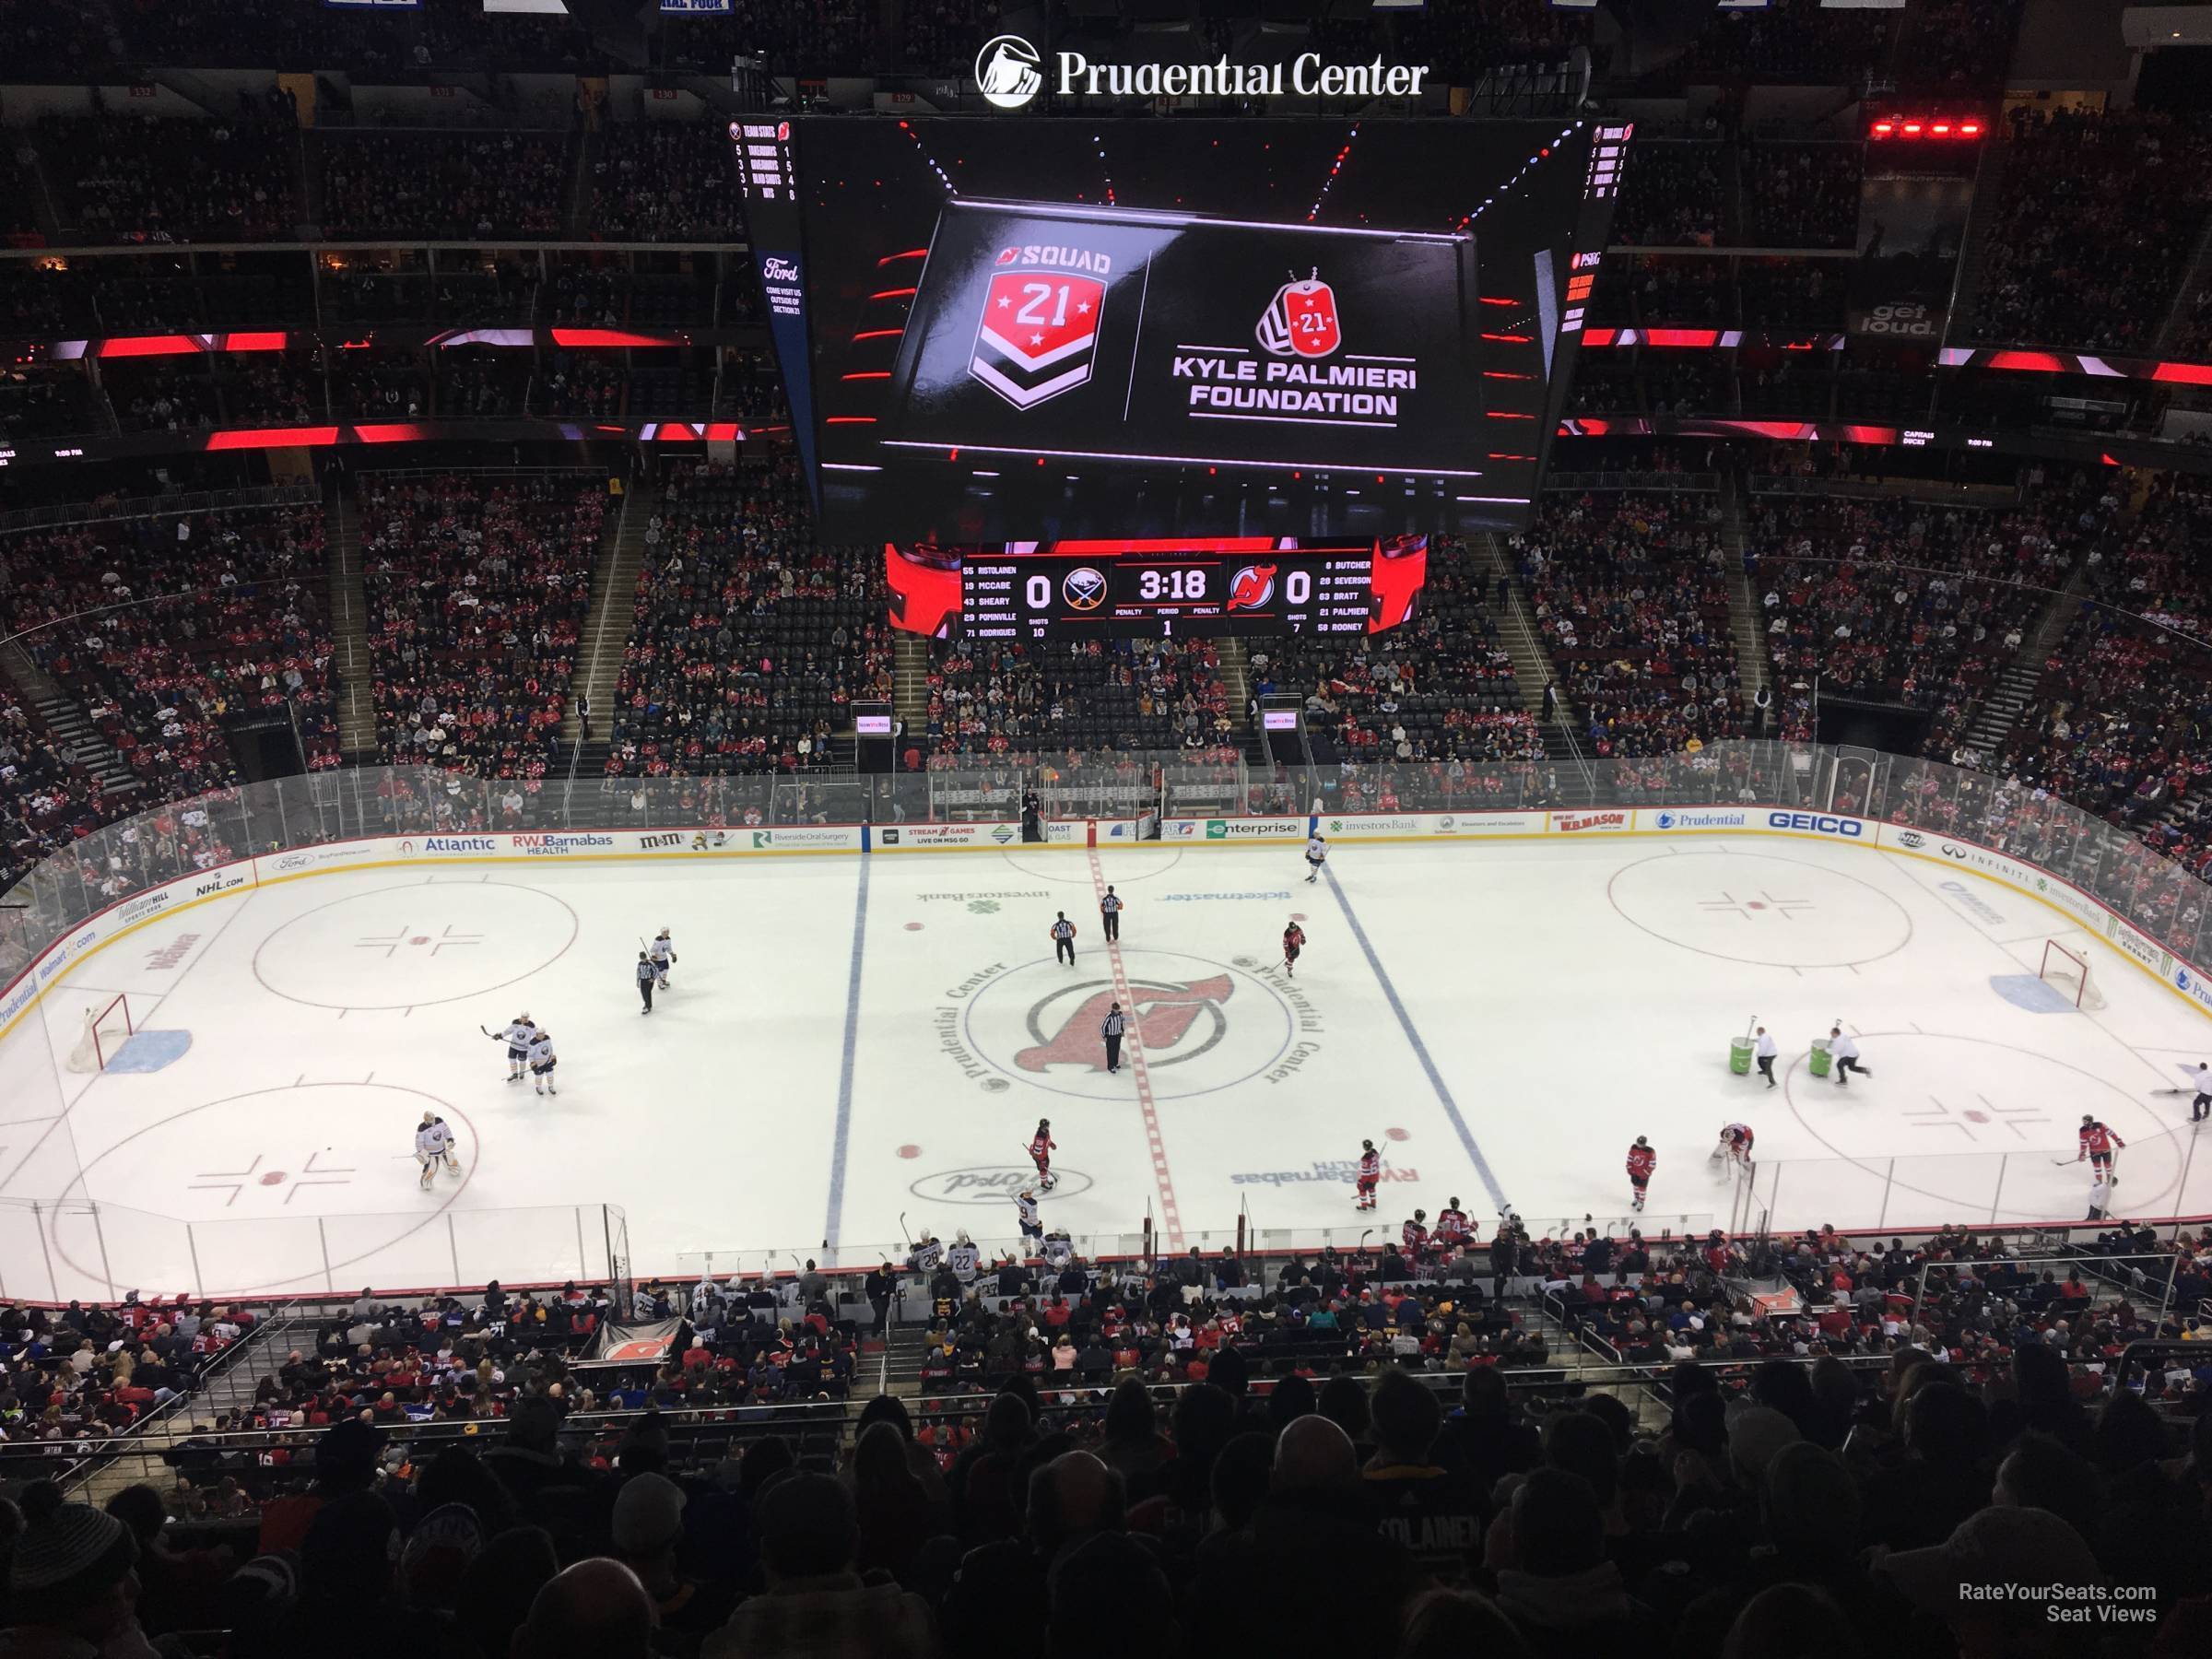 Prudential Center, section 101, home of New Jersey Devils, New